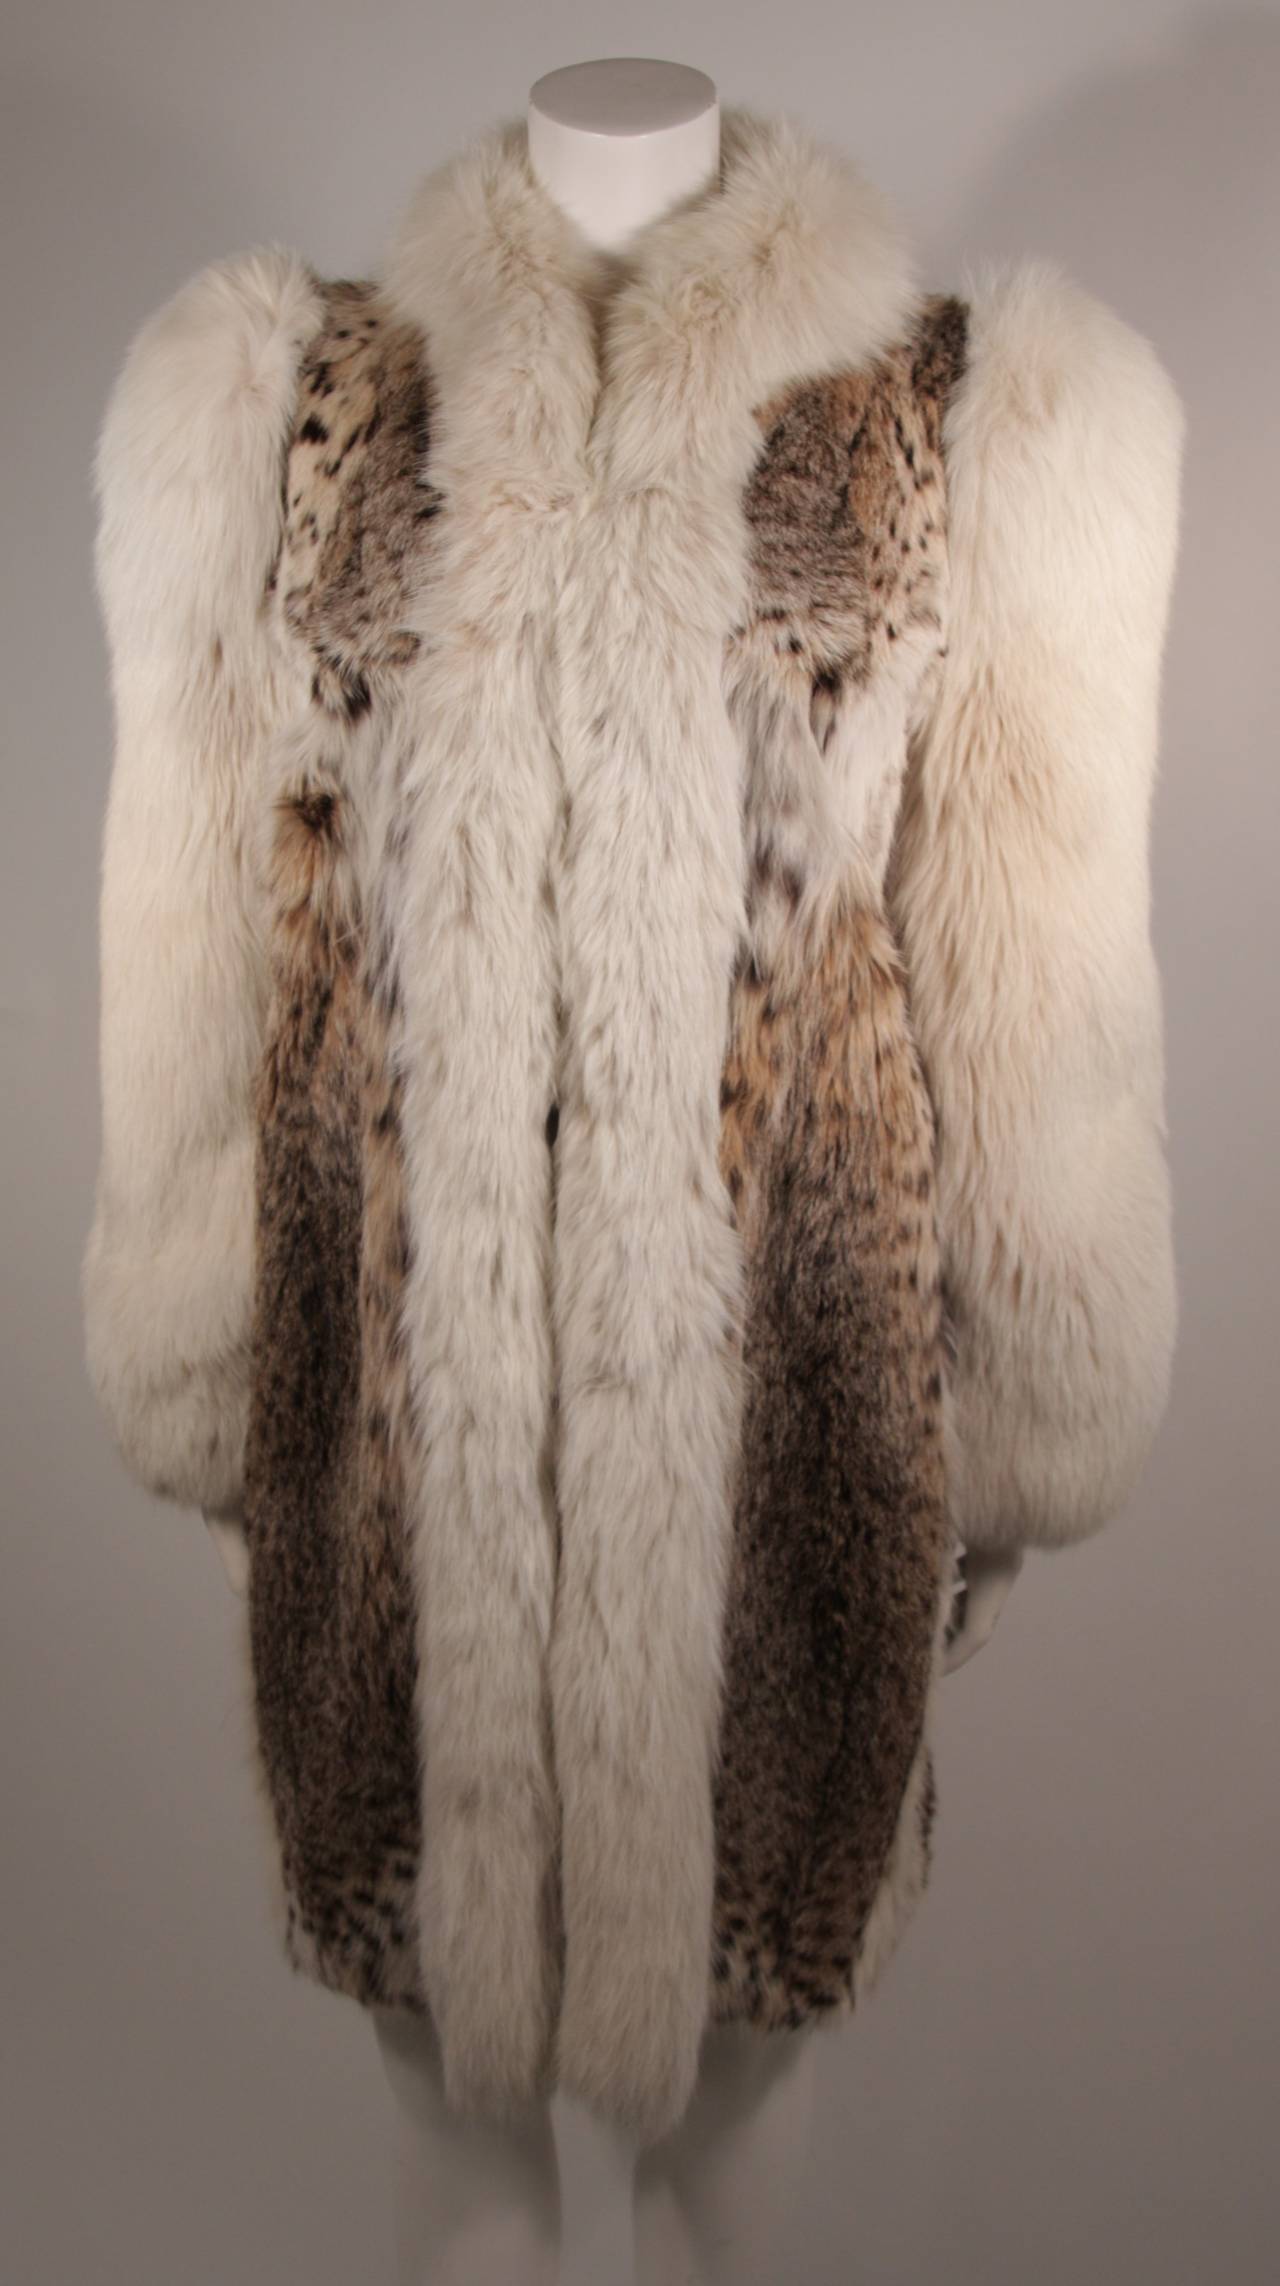 This is a Creeds of Toronto Lynx coat. This stunning coat is composed of Lynx and accented with fox. There are two side pockets. The coat is in good vintage condition, there is some slight wear at the cuffs, lining is in great condition. It is